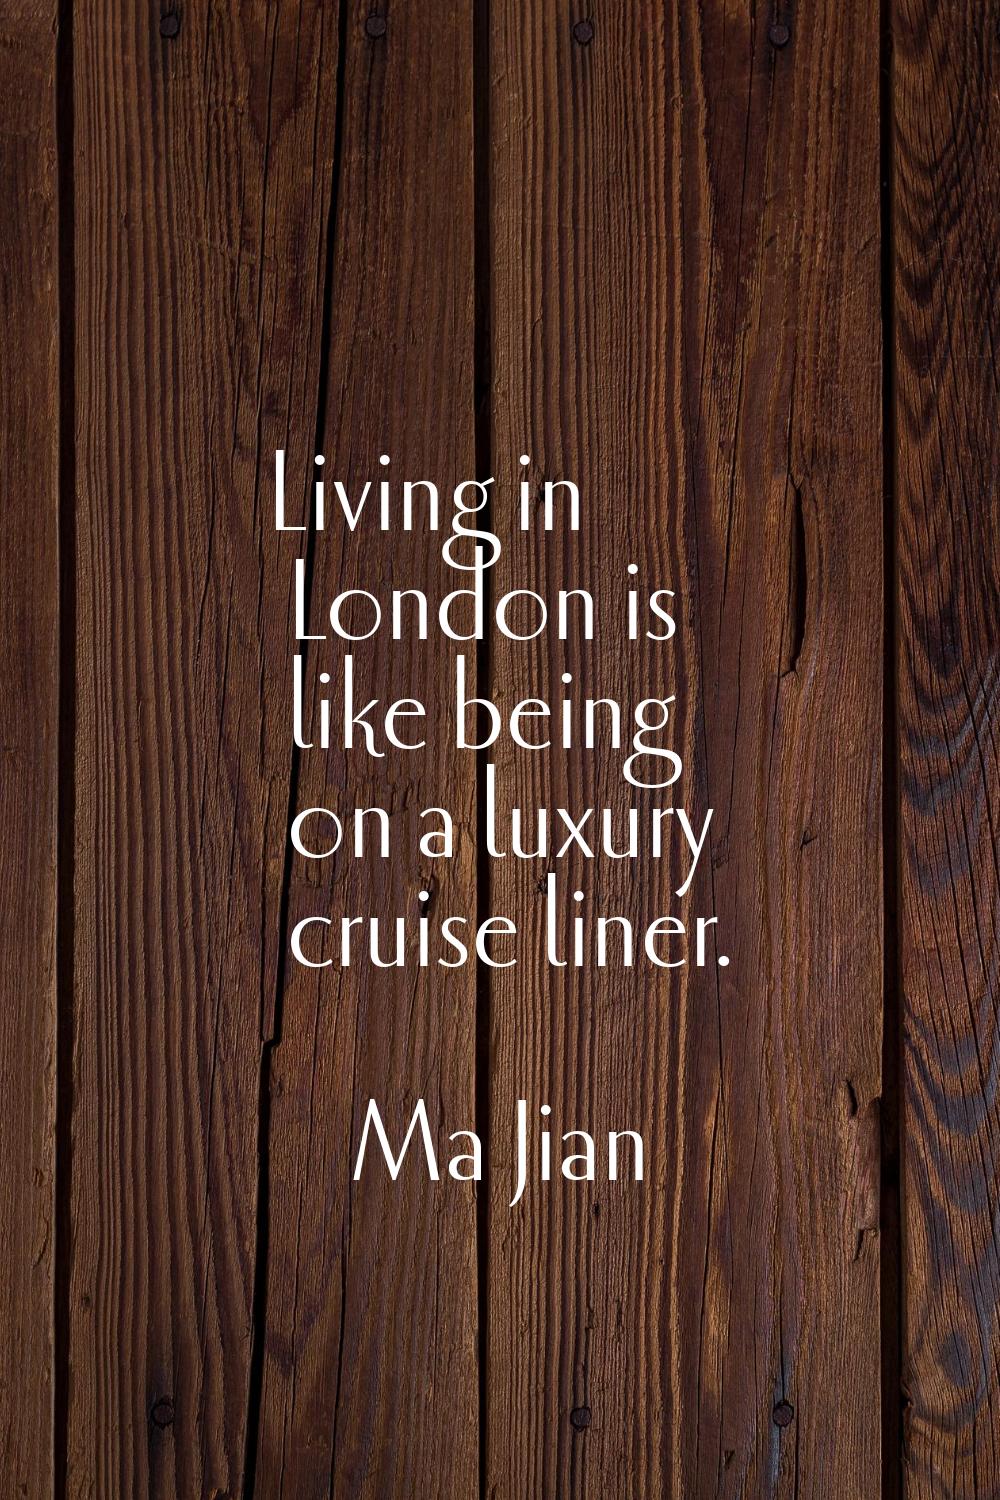 Living in London is like being on a luxury cruise liner.